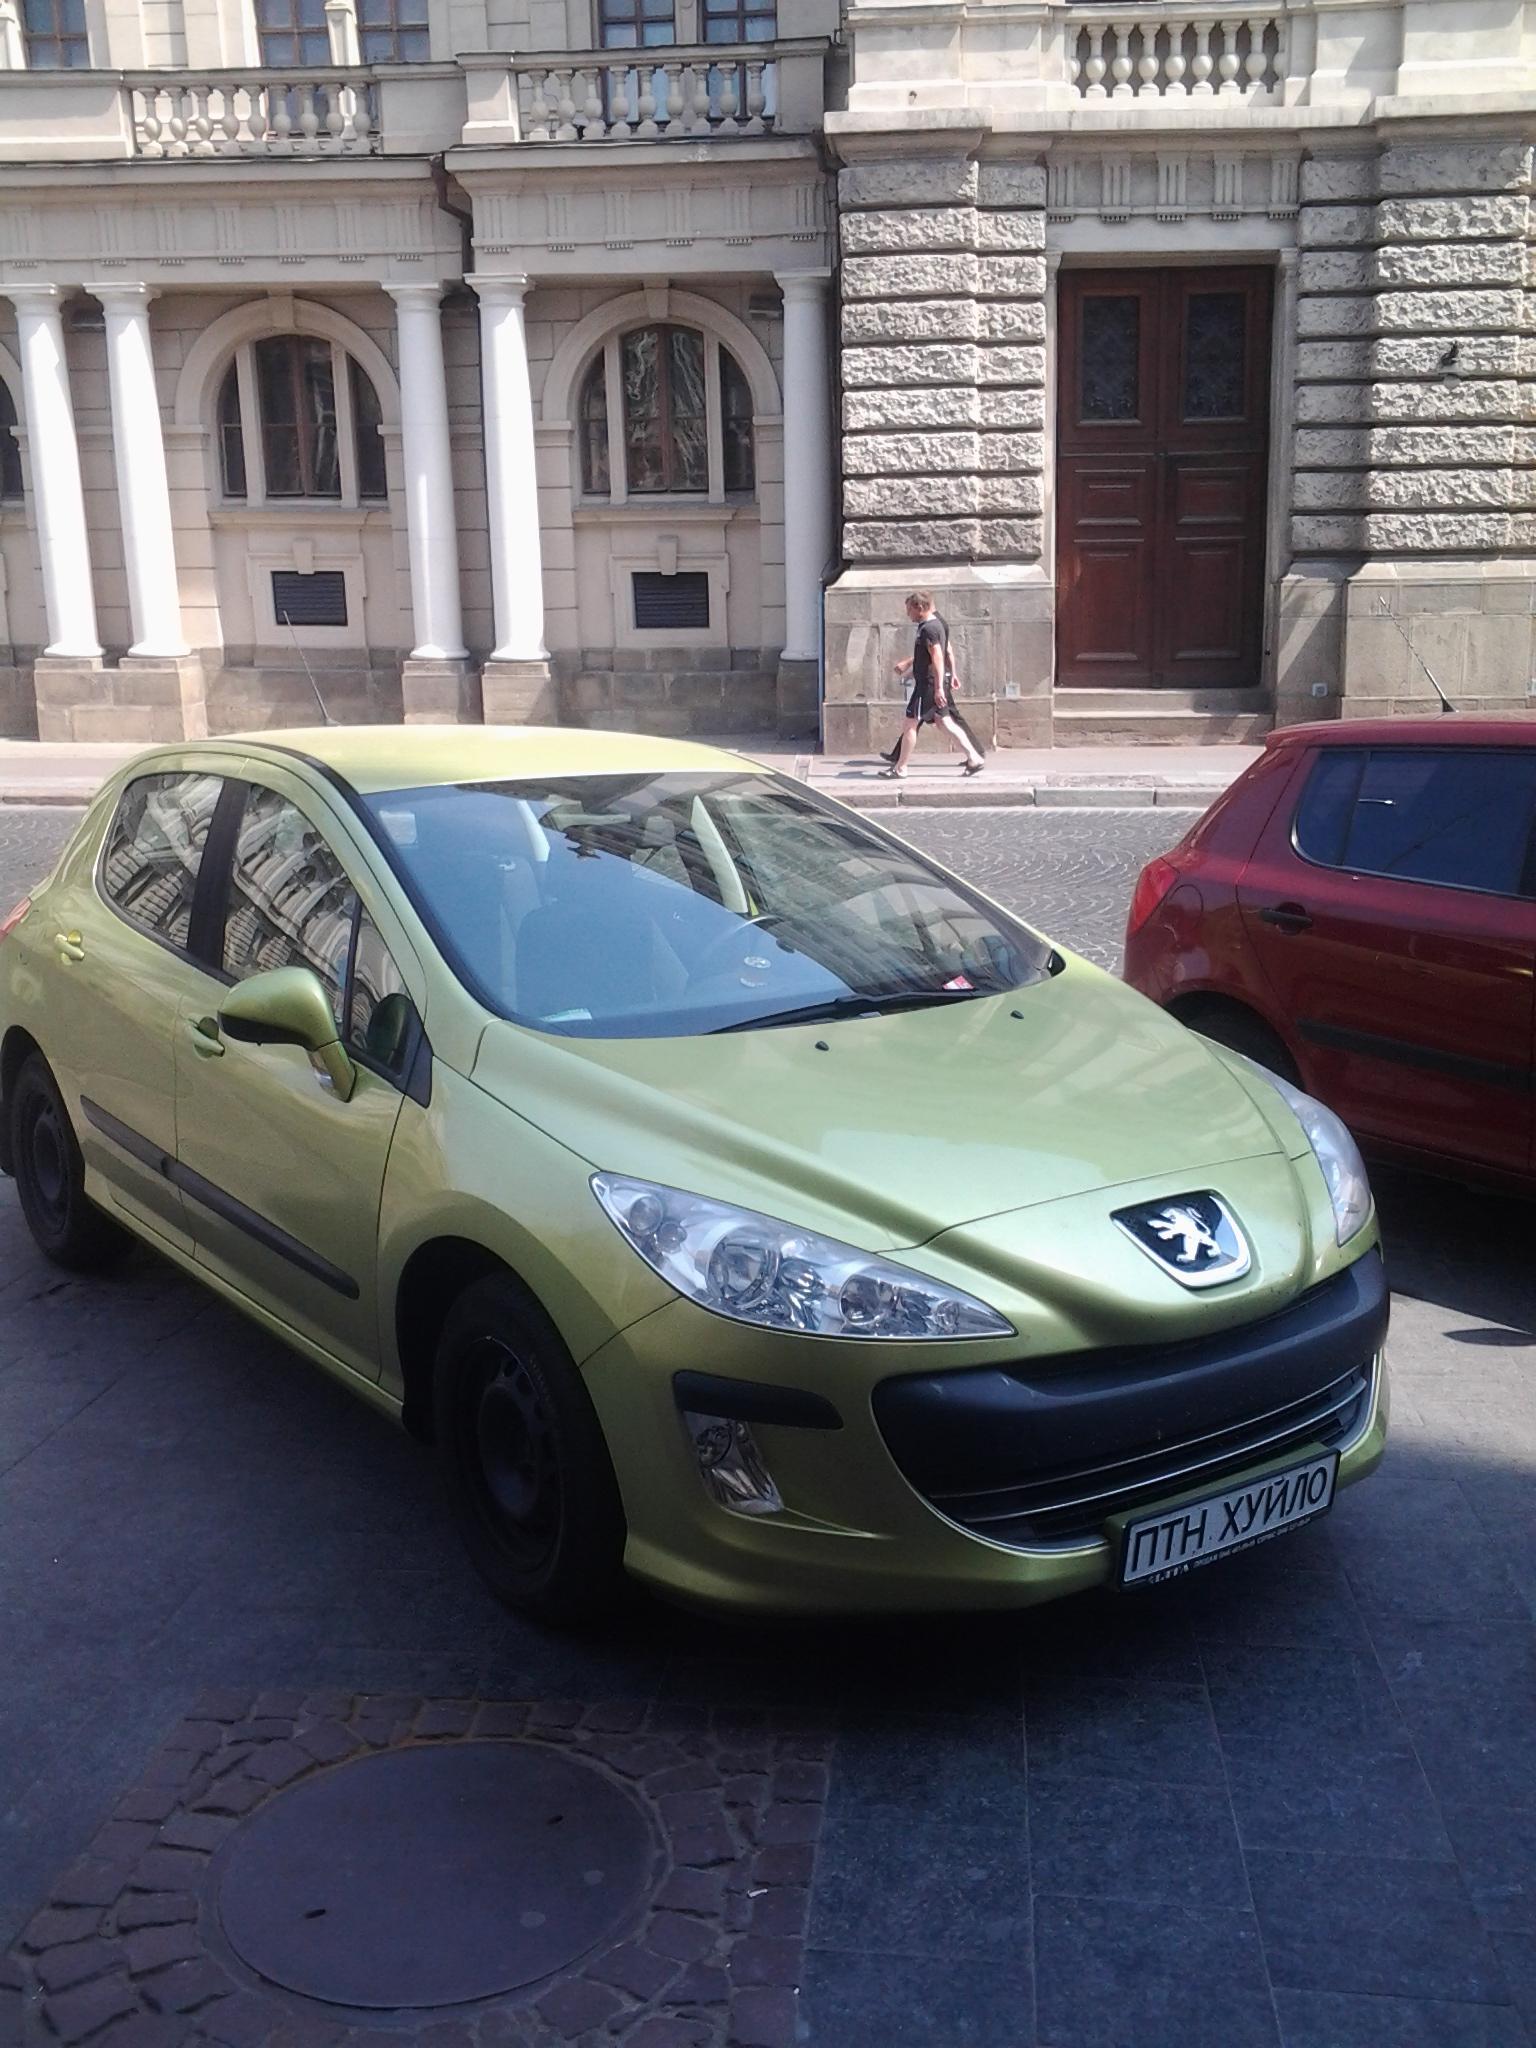 http://tuning.lviv.ua/forum/download/file.php?id=99685&amp;mode=view/%D0%A4%D0%BE%D1%82%D0%BE2119.jpg